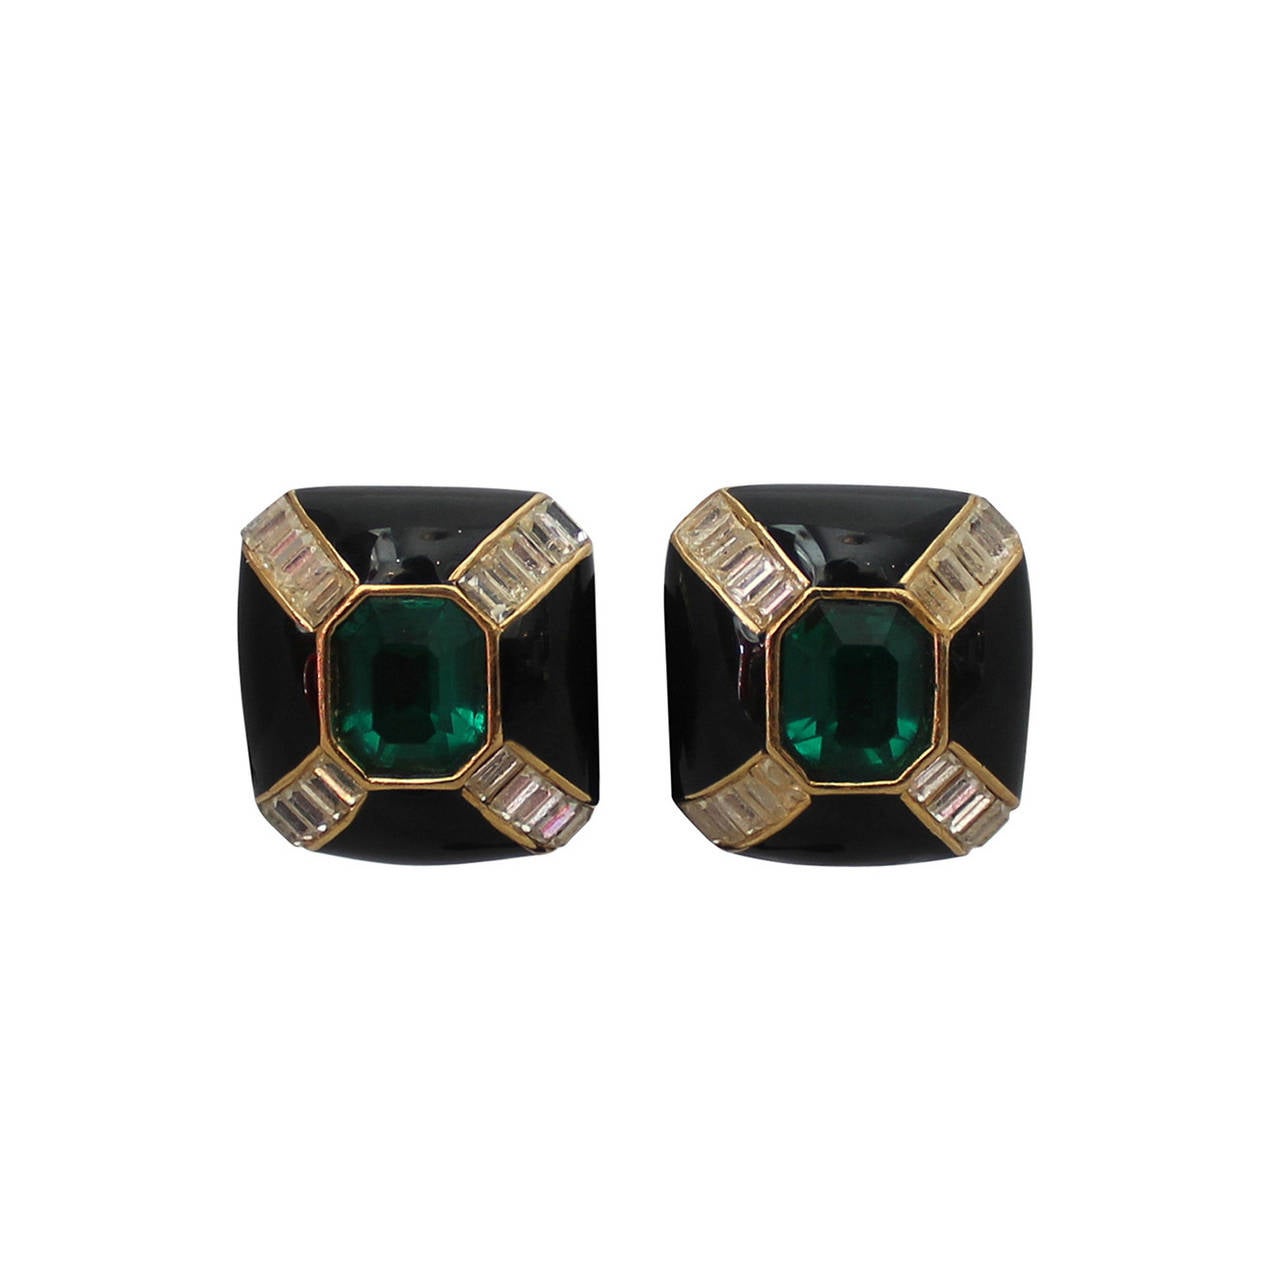 1990s Ciner Black Enamel and Goldtone Earrings with Green Center